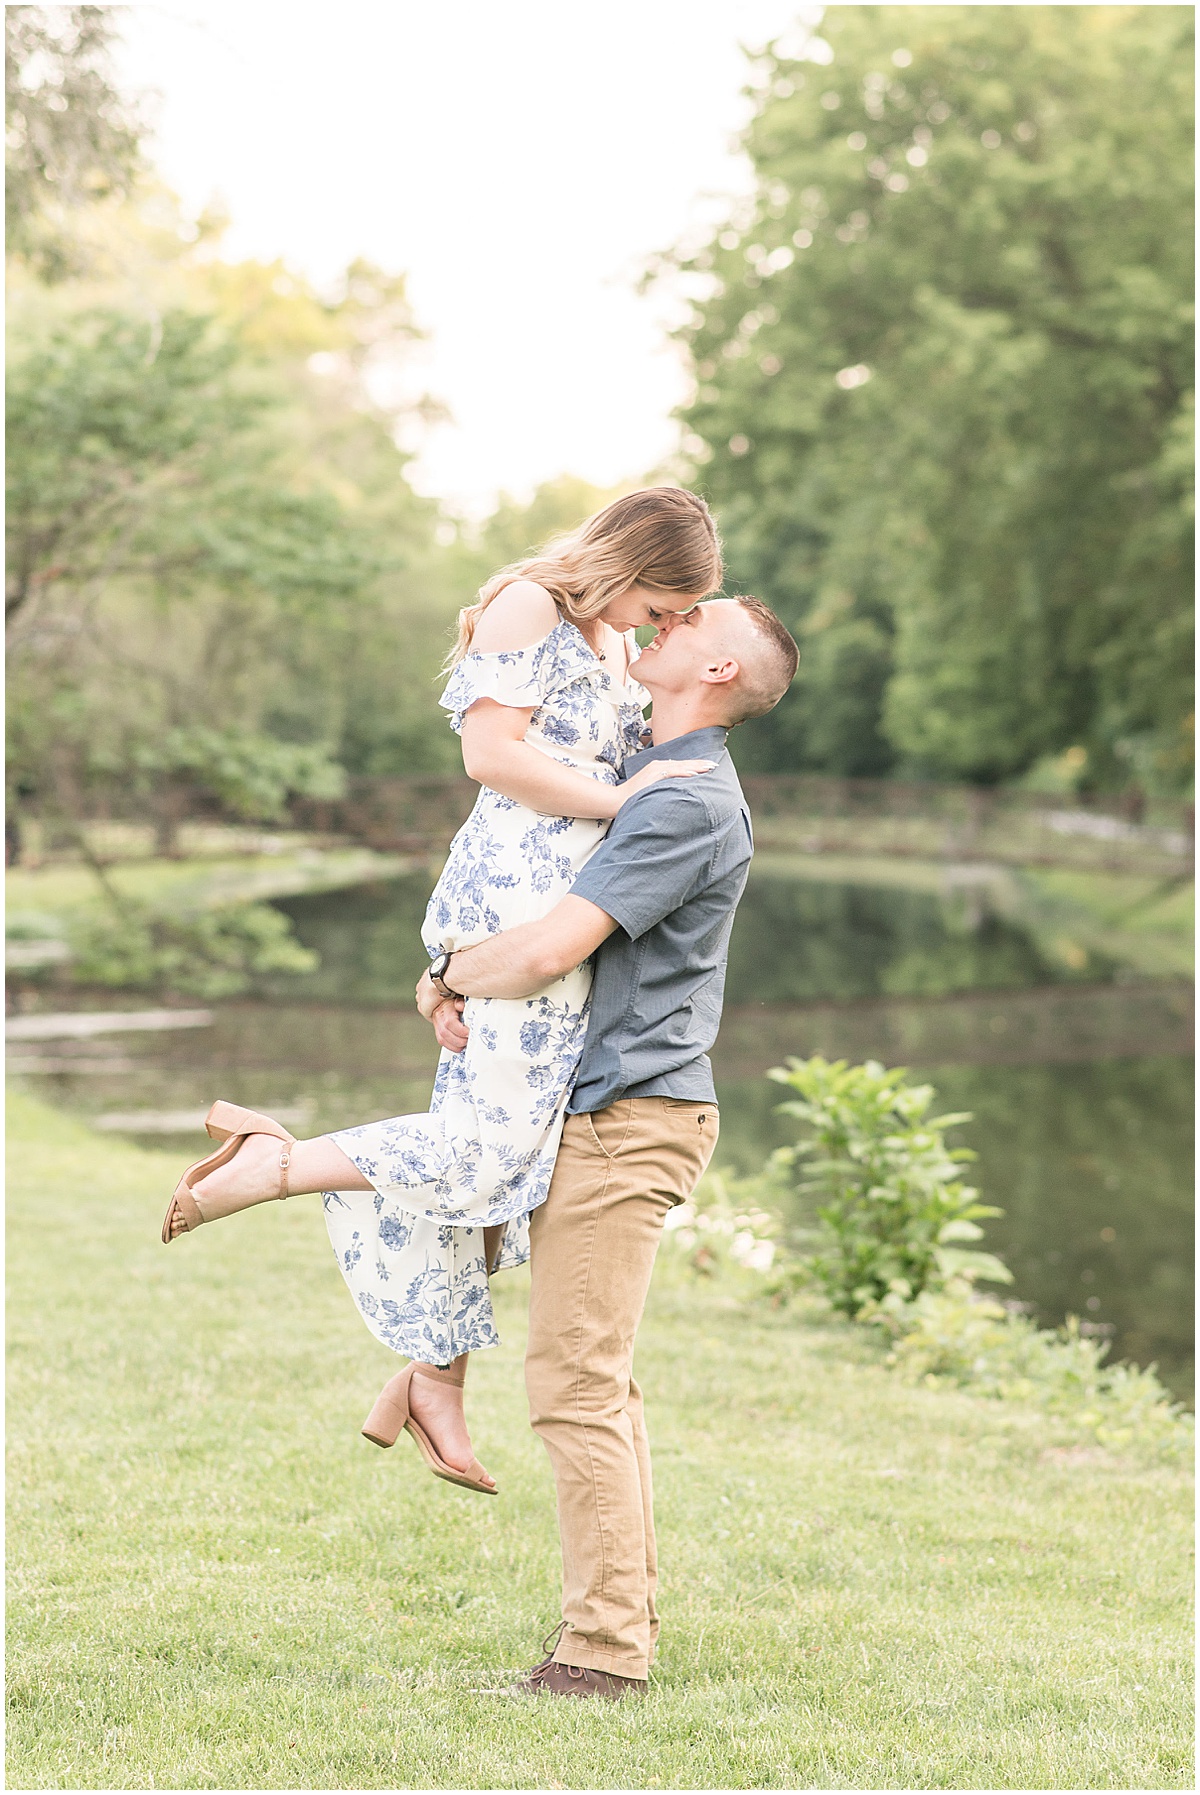 Man lifts his fiancee next to bridge by Indianapolis wedding photographer Victoria Rayburn Photography